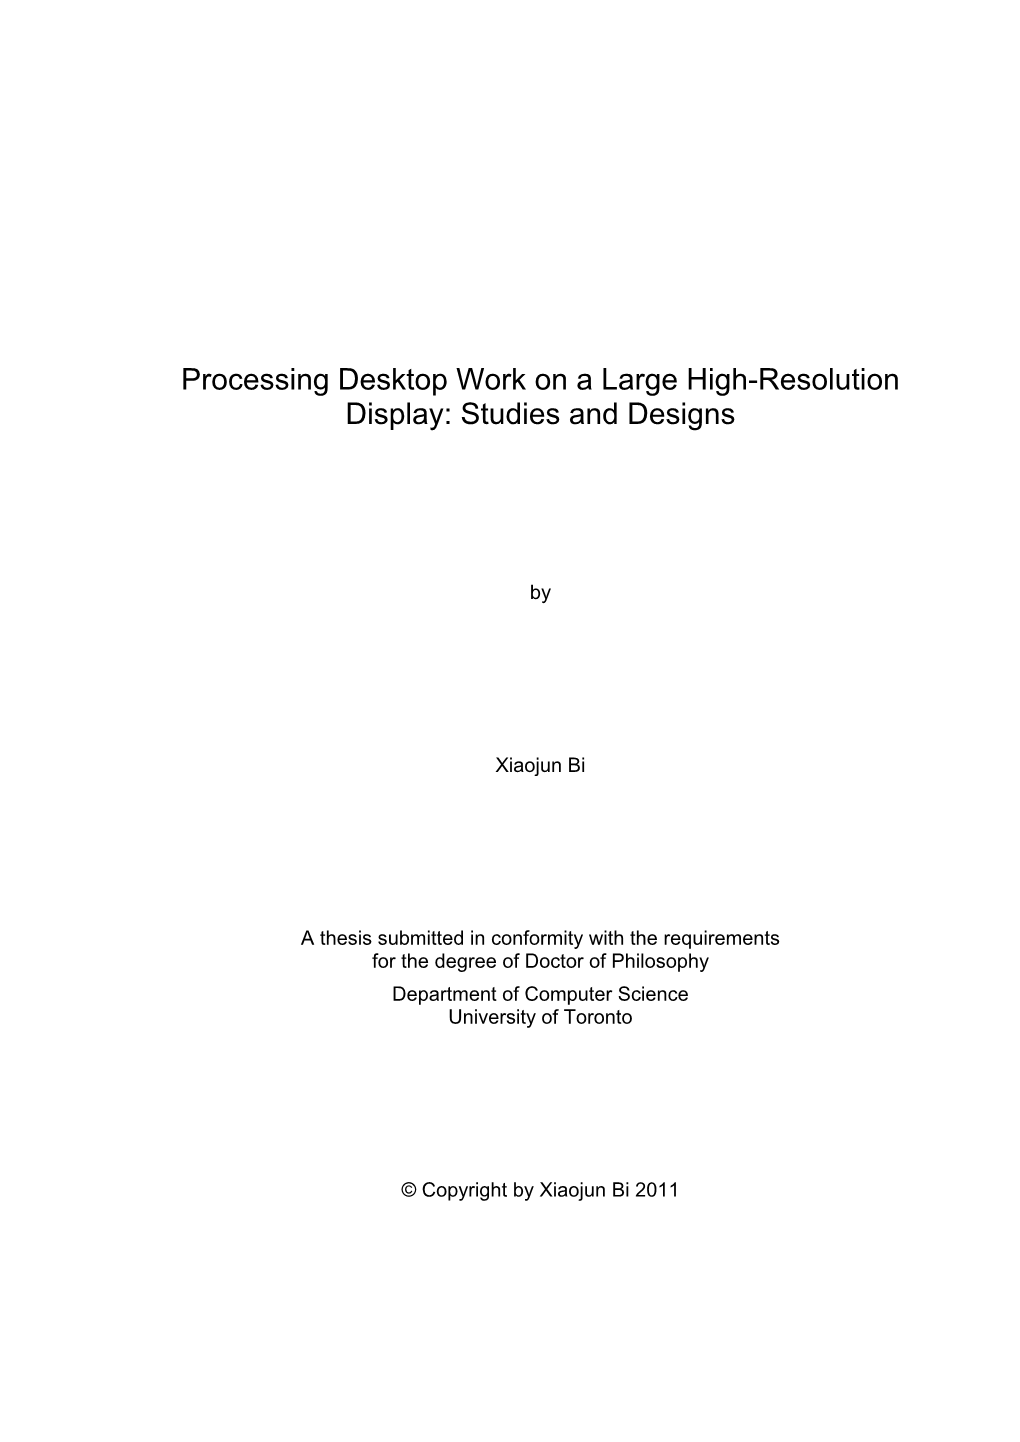 Processing Desktop Work on a Large High-Resolution Display: Studies and Designs